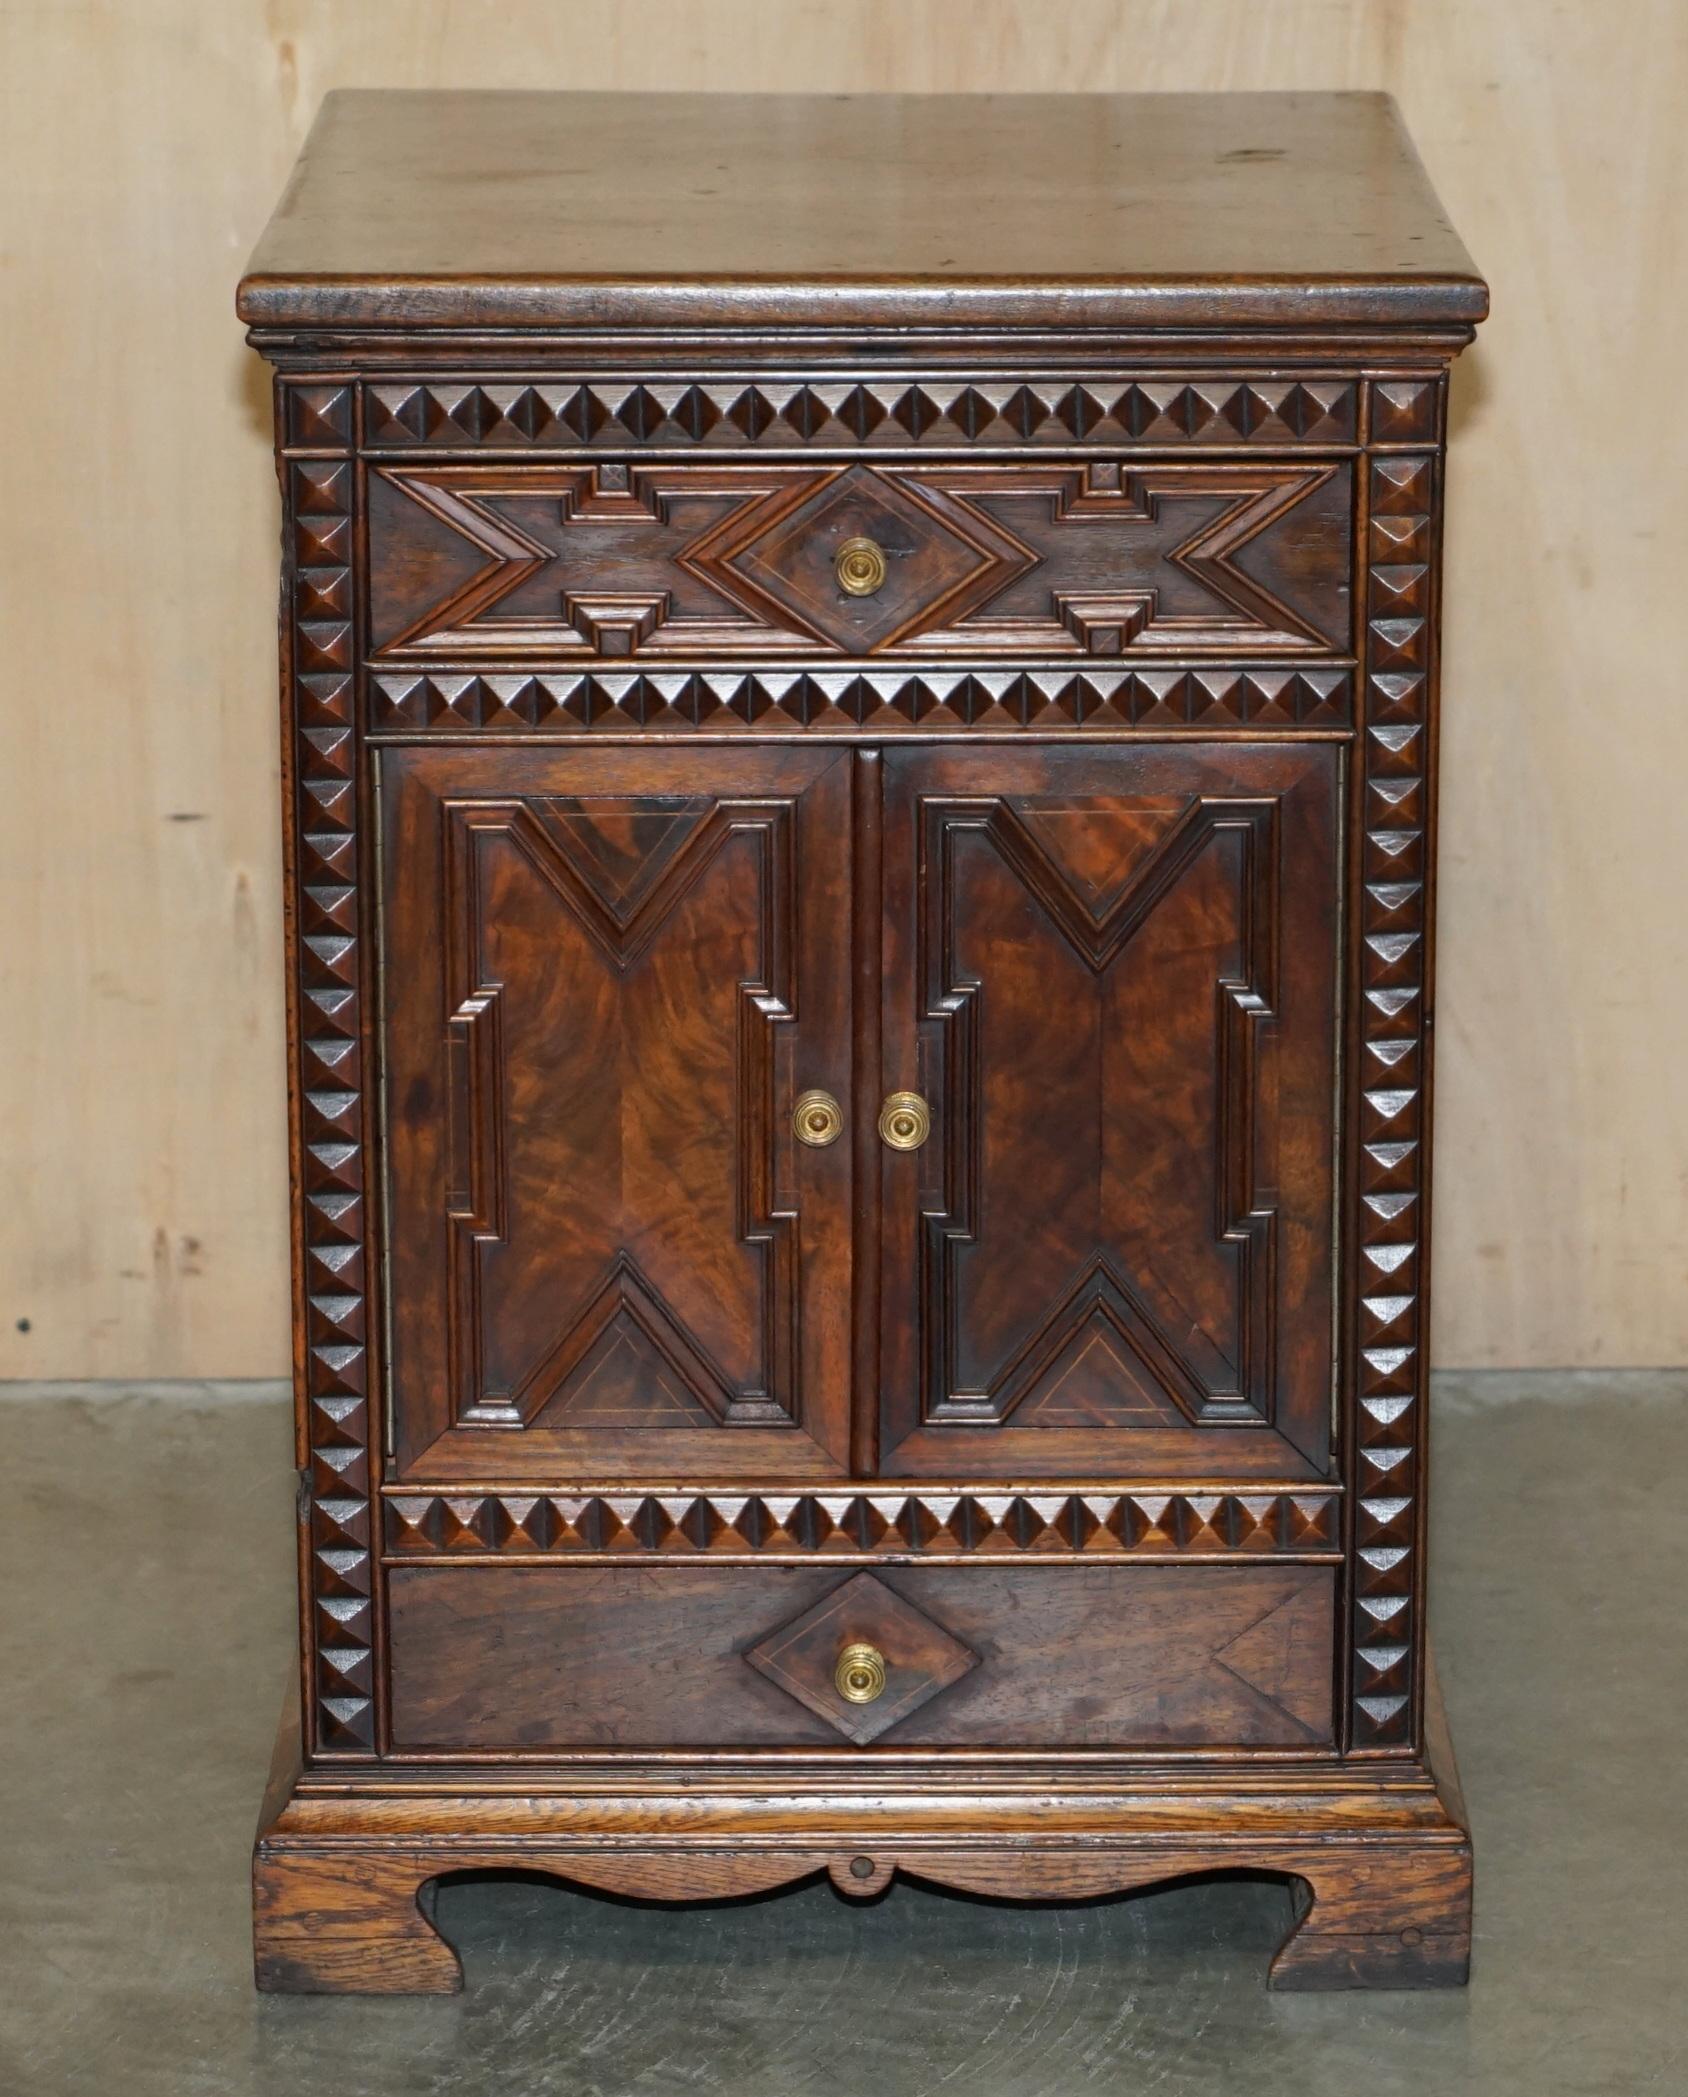 Royal House Antiques

Royal House Antiques is delighted to offer for sale this very well made, hand carved in England, Jacobean revival sideboard cupboard 

Please note the delivery fee listed is just a guide, it covers within the M25 only for the